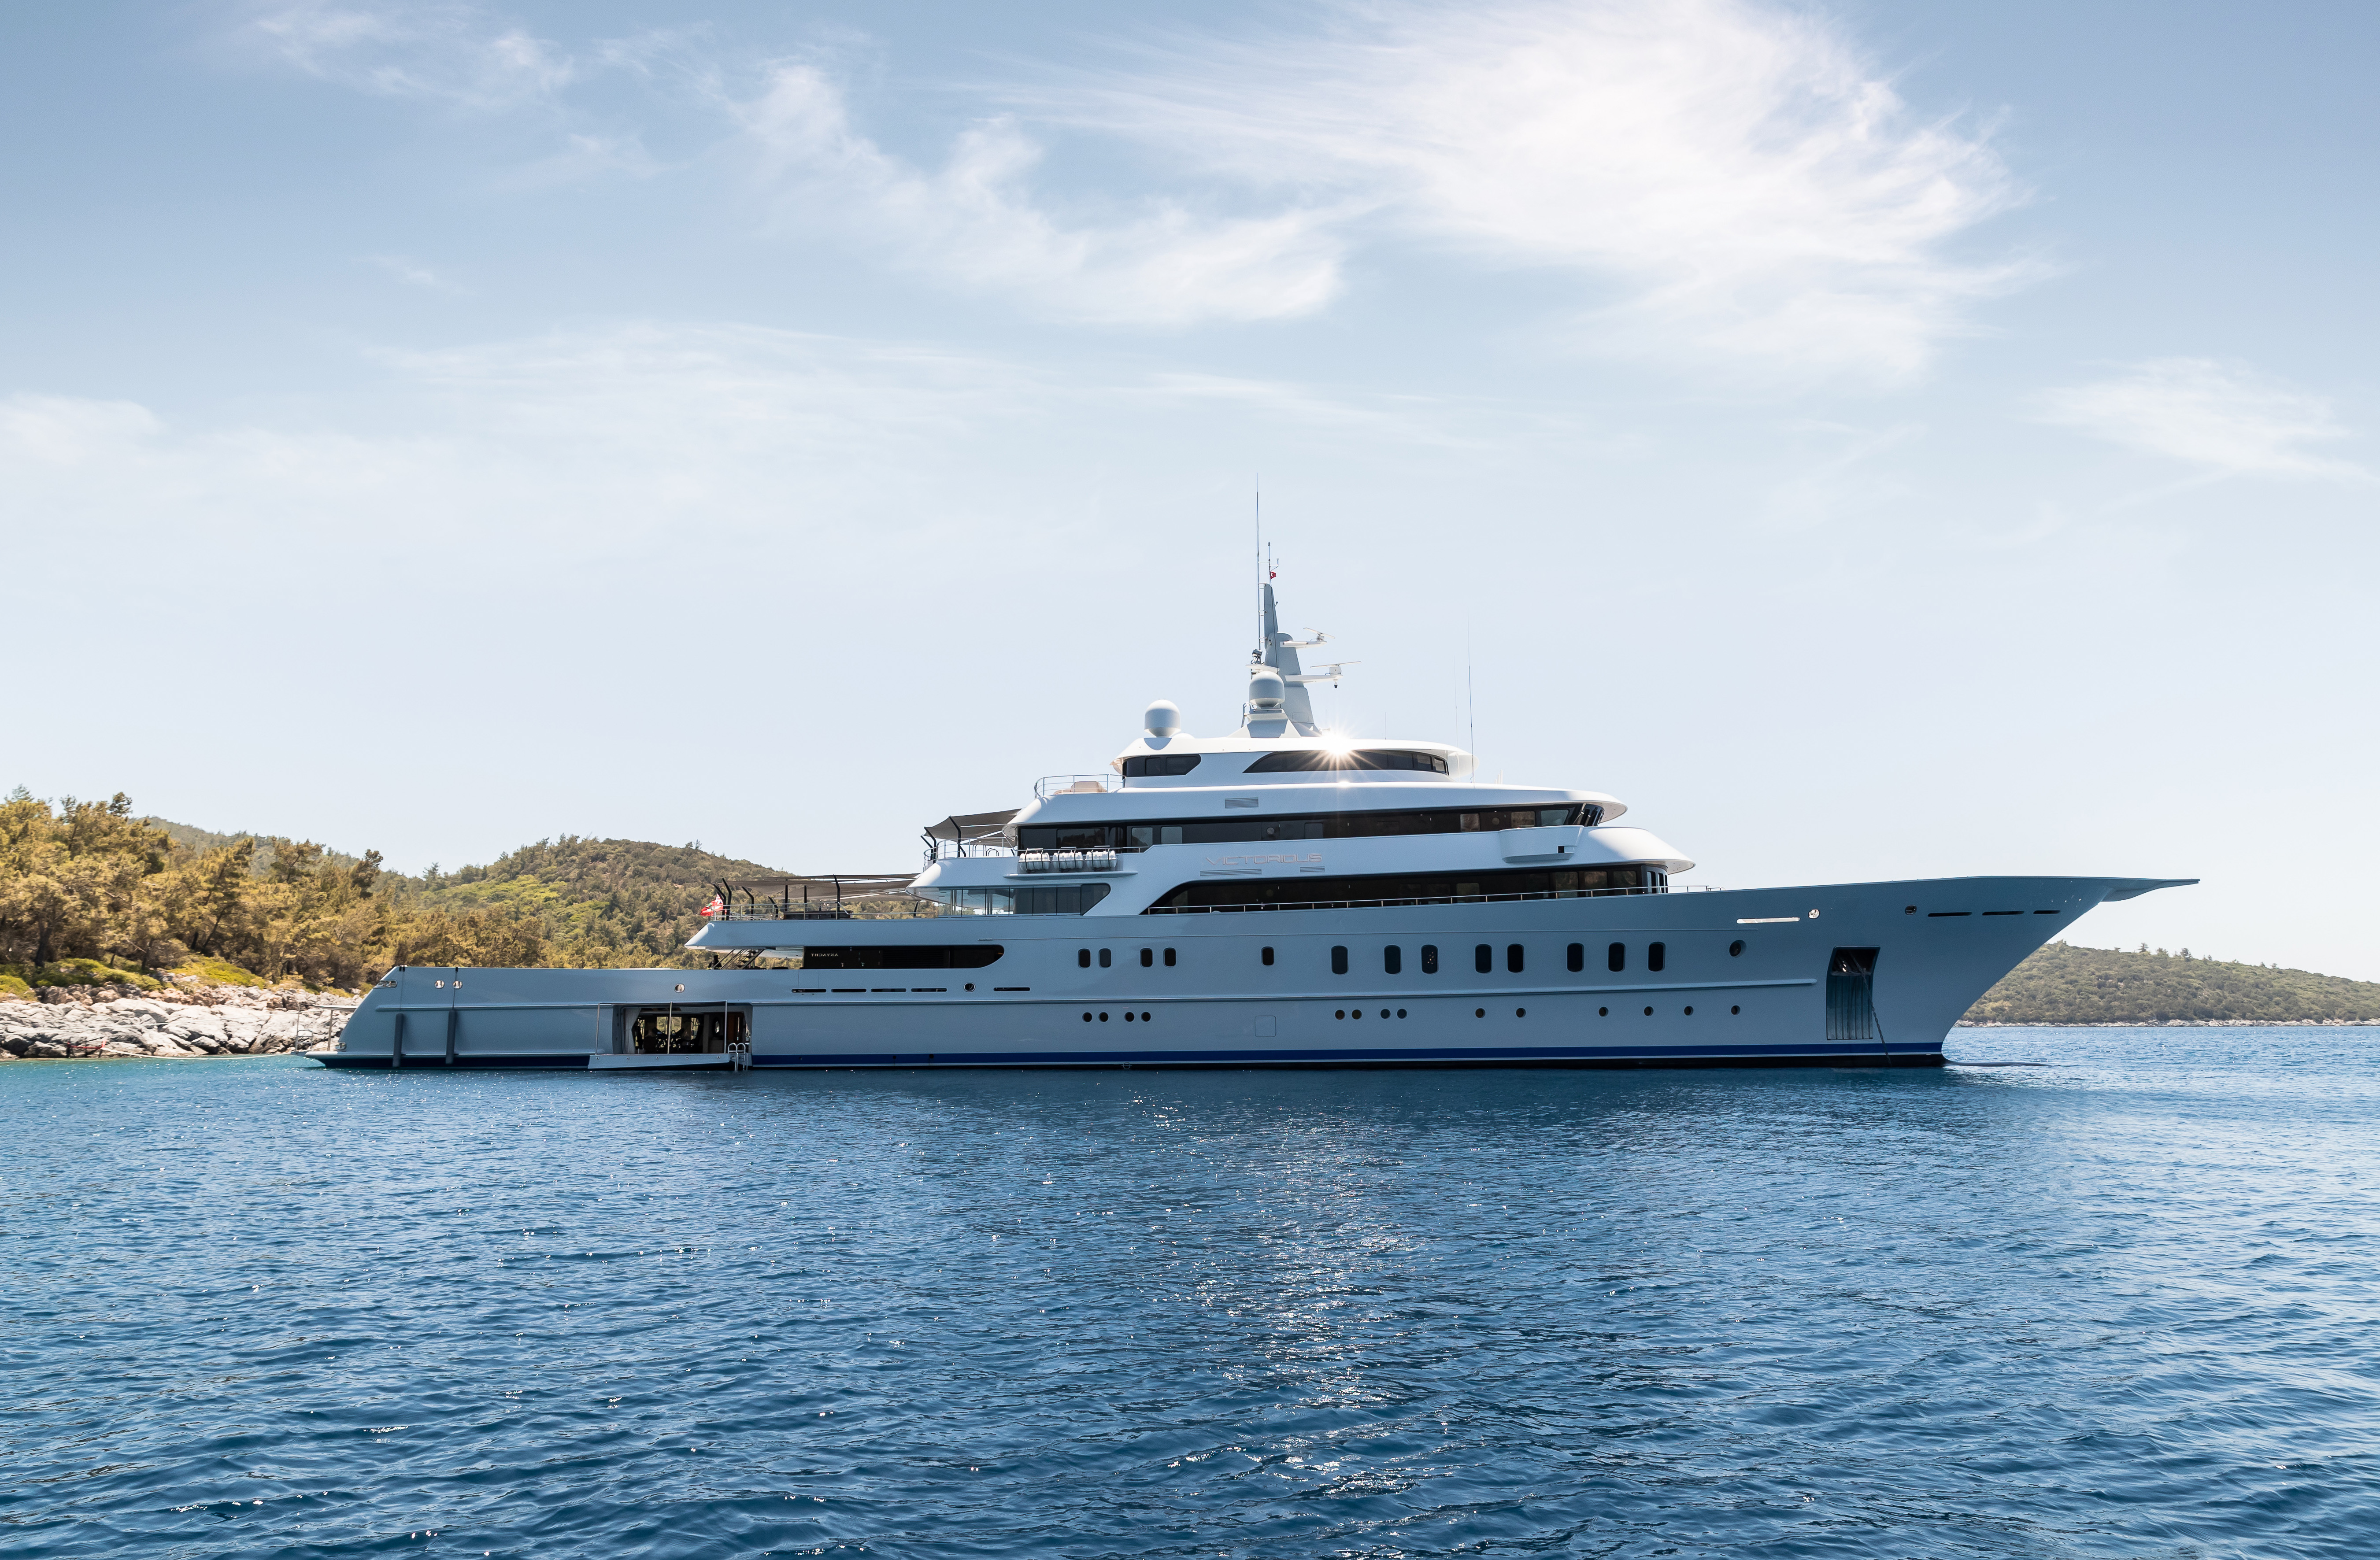 m/y victorious yacht for charter on beautiful blue water